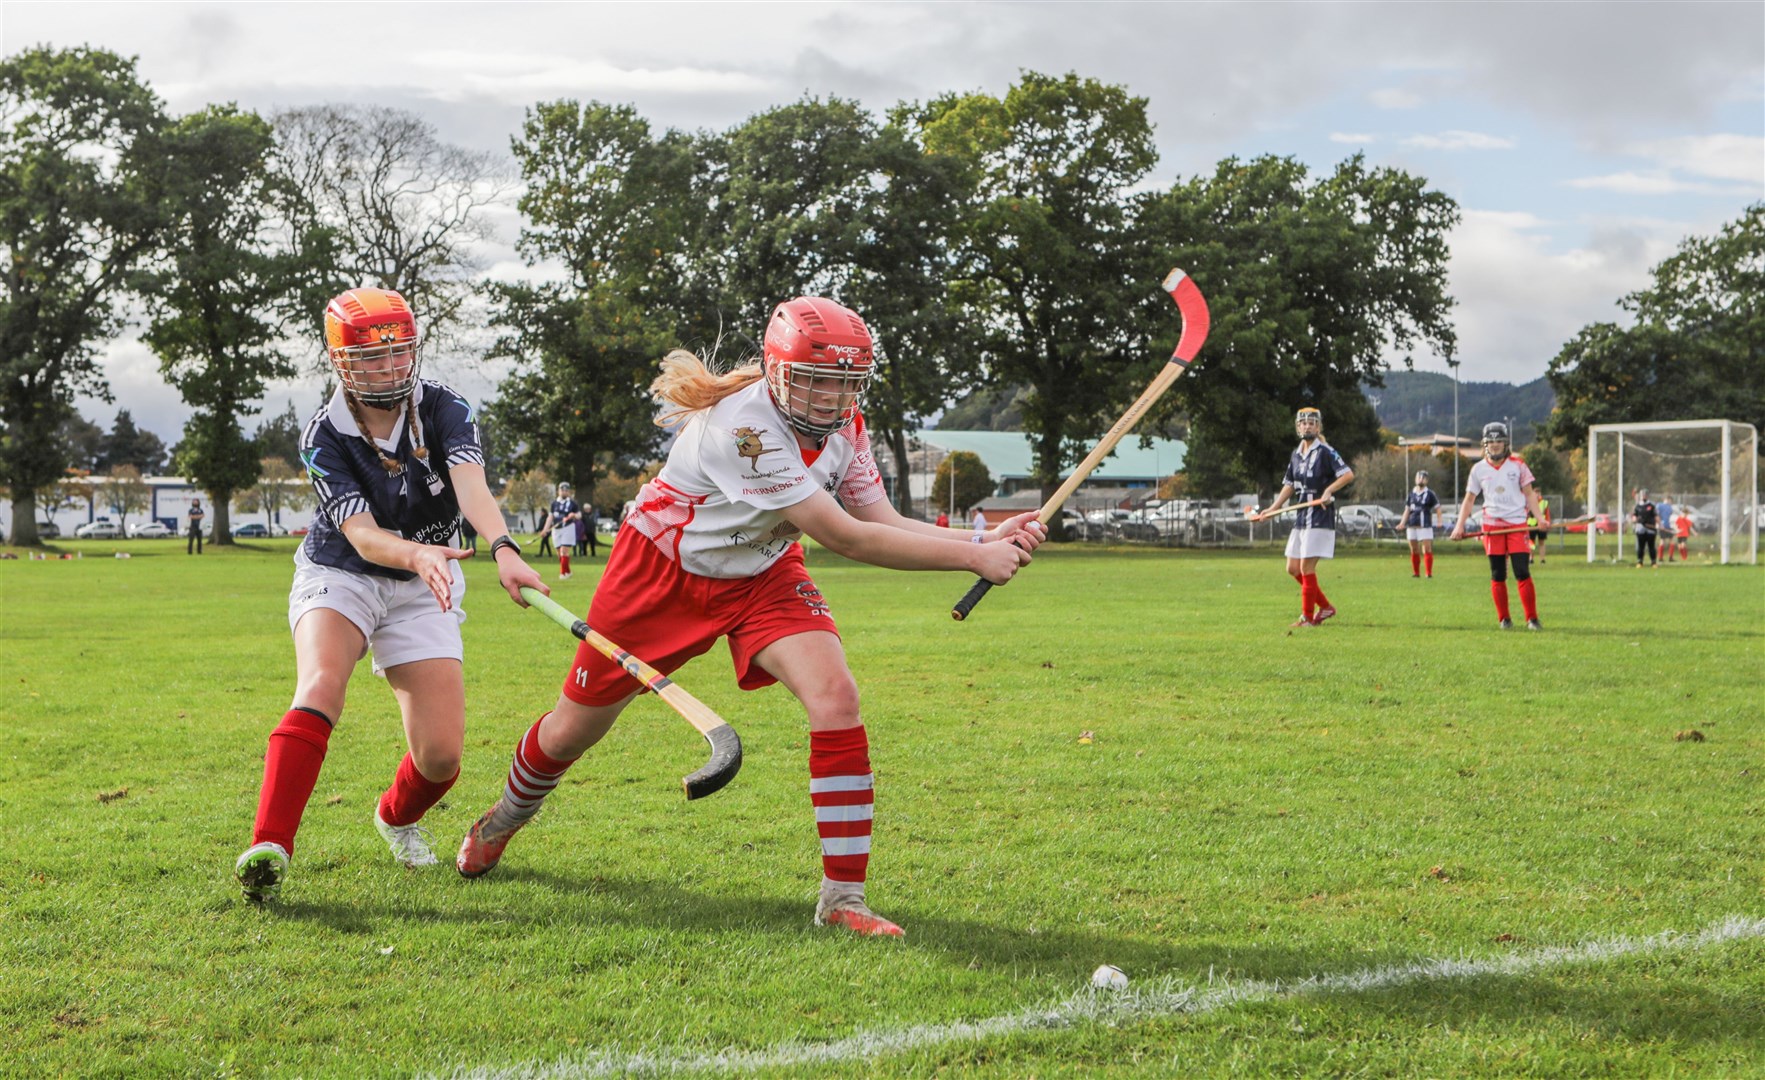 Women's Mod Shinty Cup action at Bught Park this year.